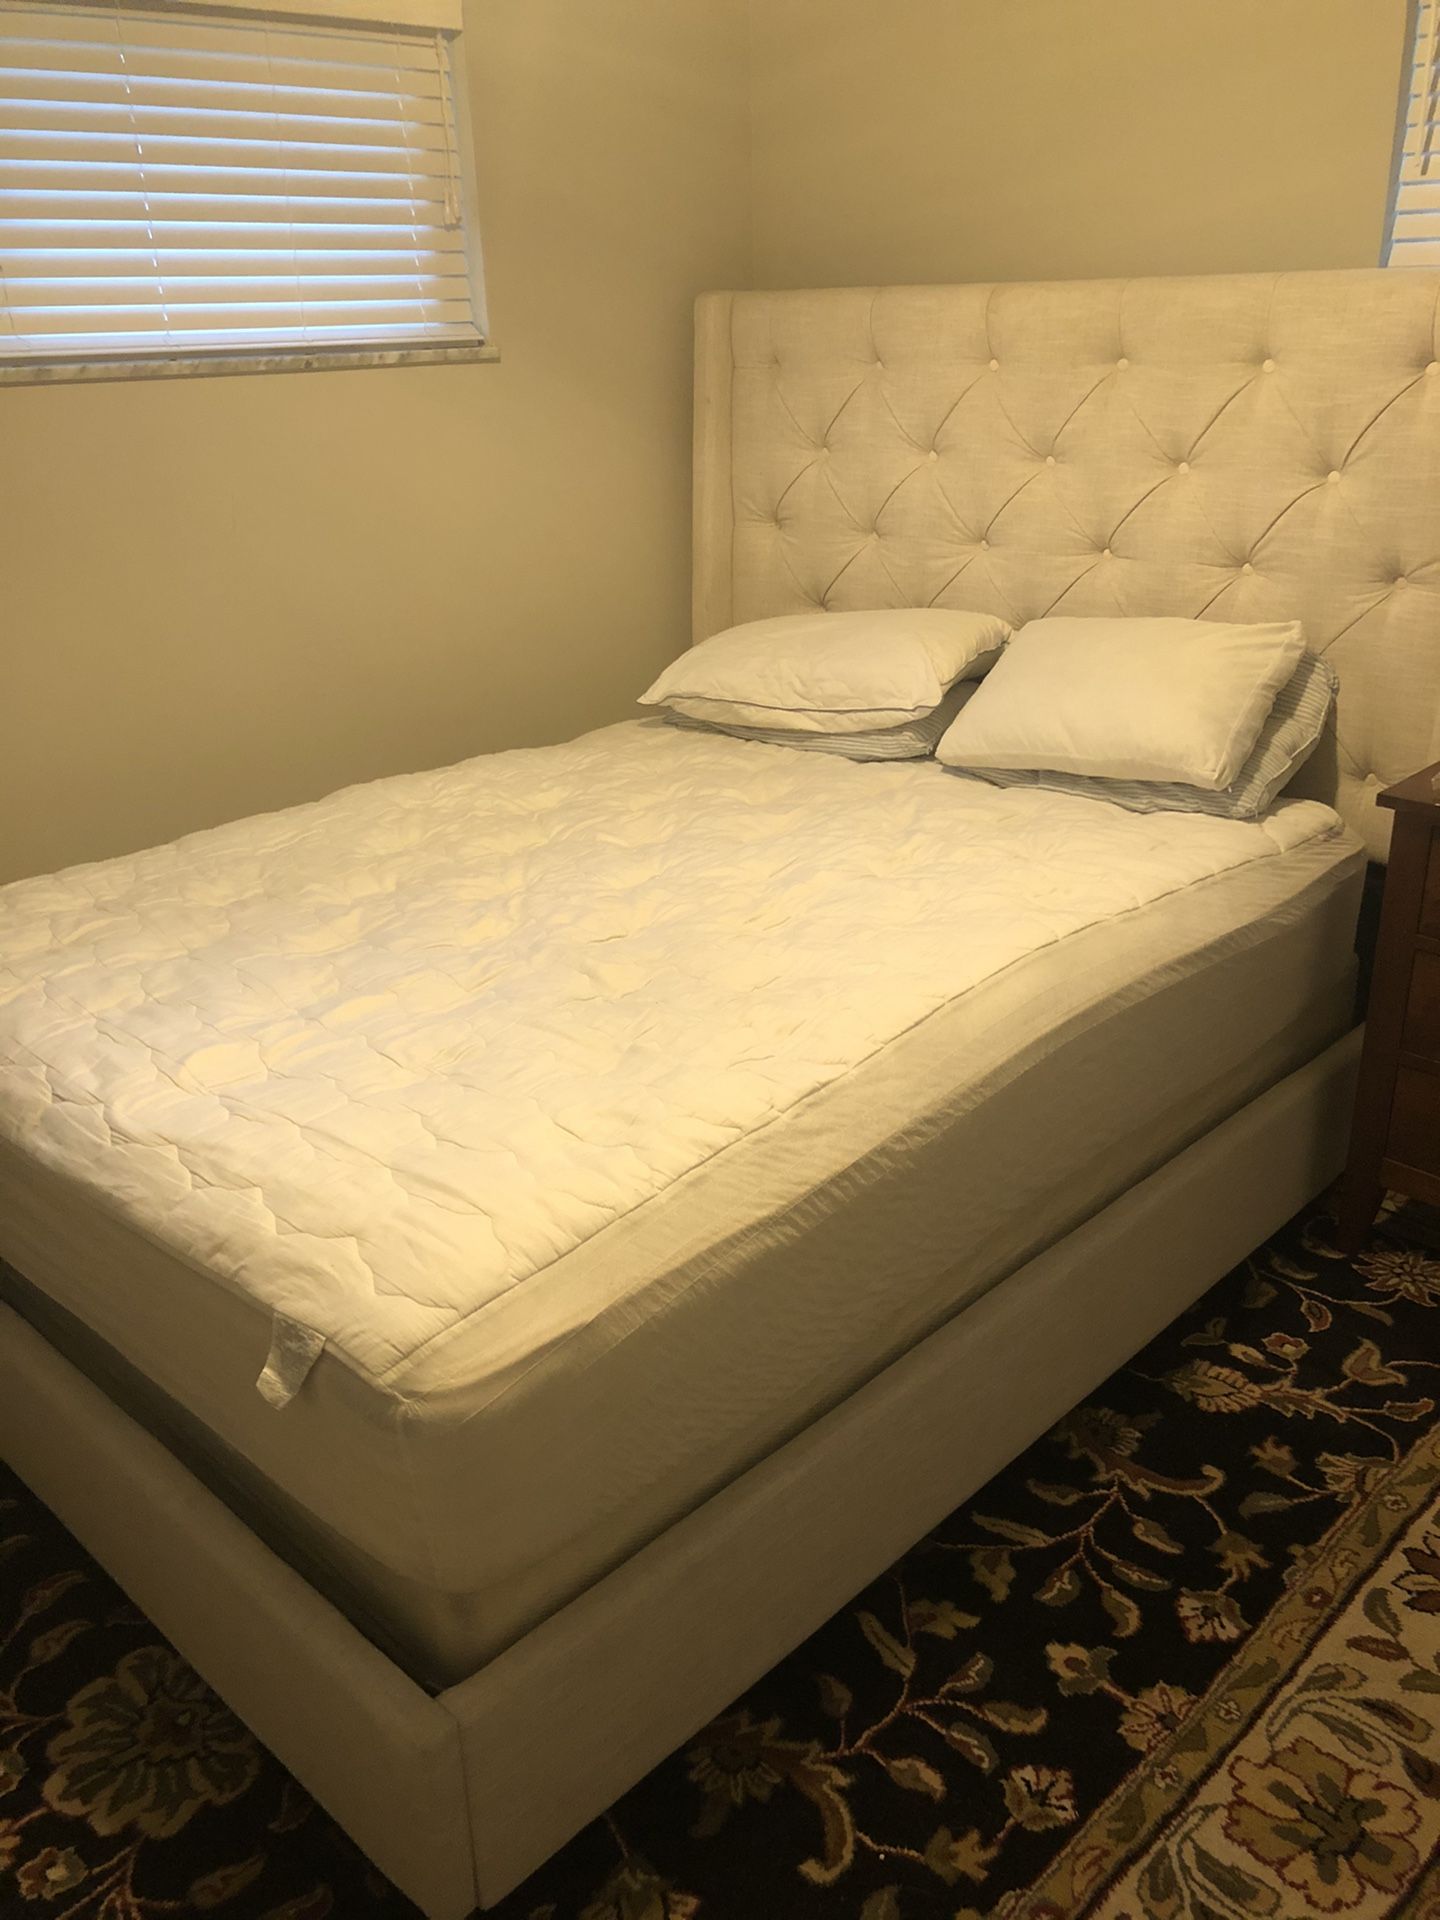 Bed Frame, Mattress, and Box Spring